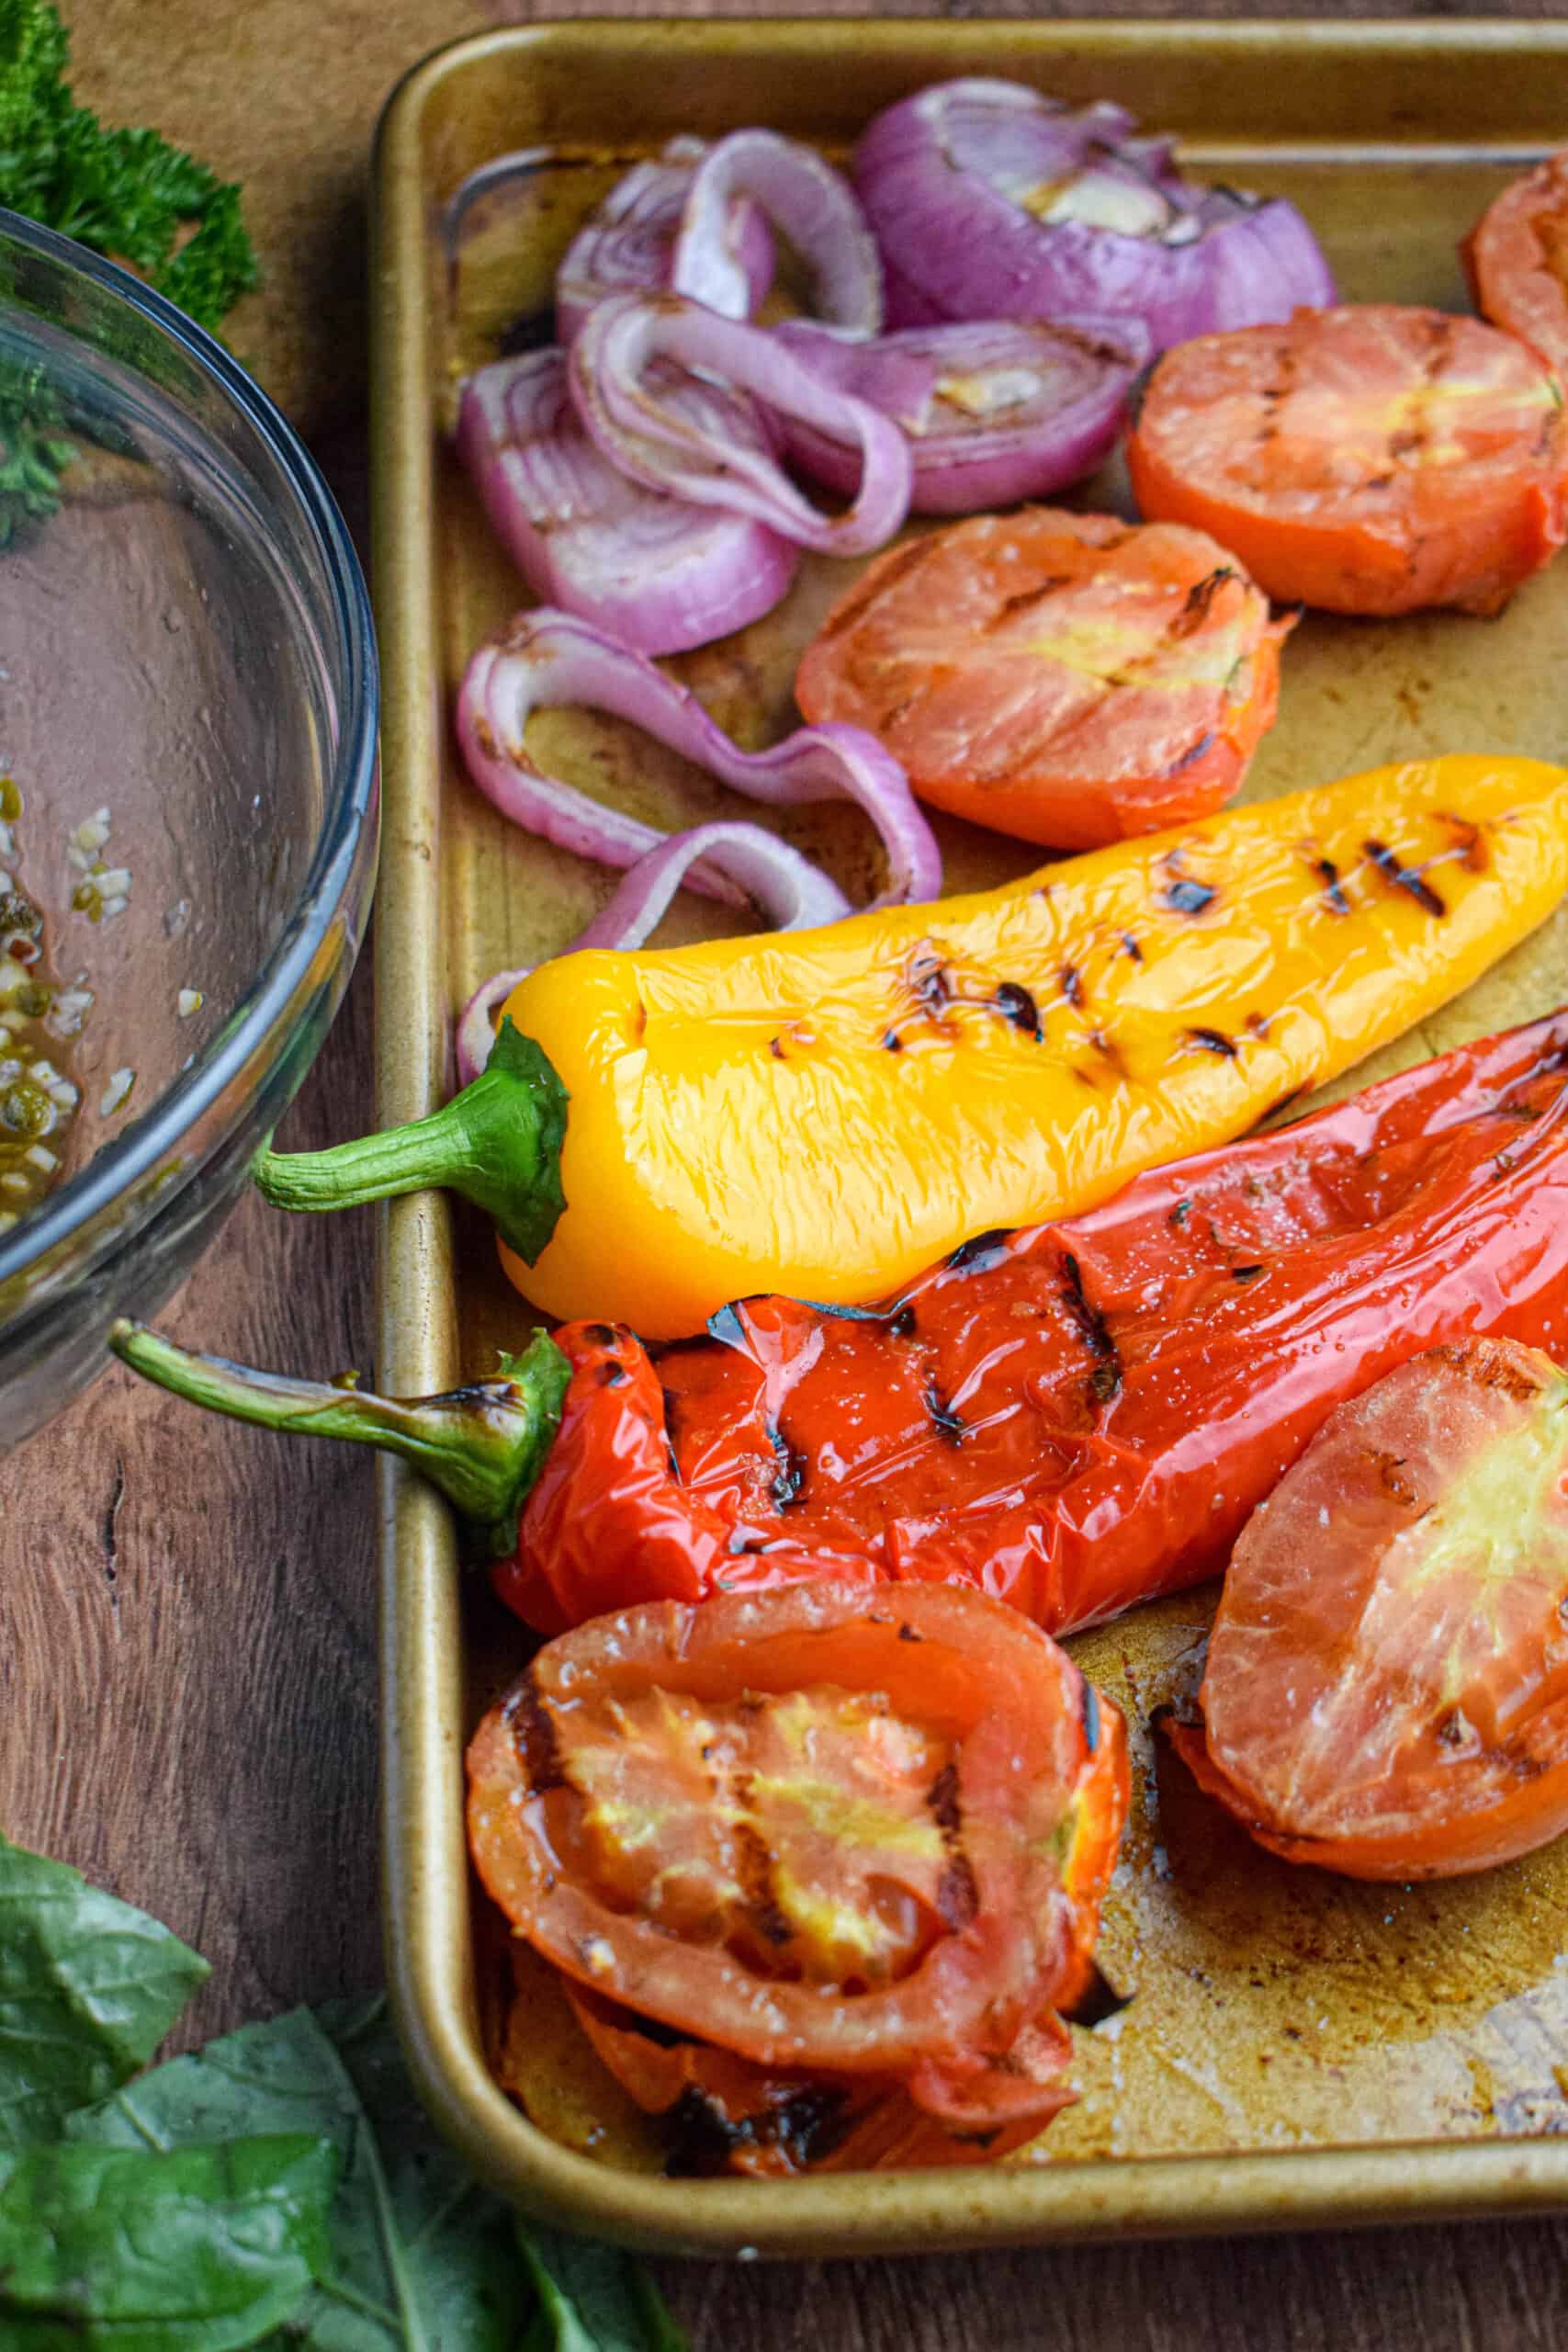 tray of grilled vegetables: peppers, tomatoes and onions